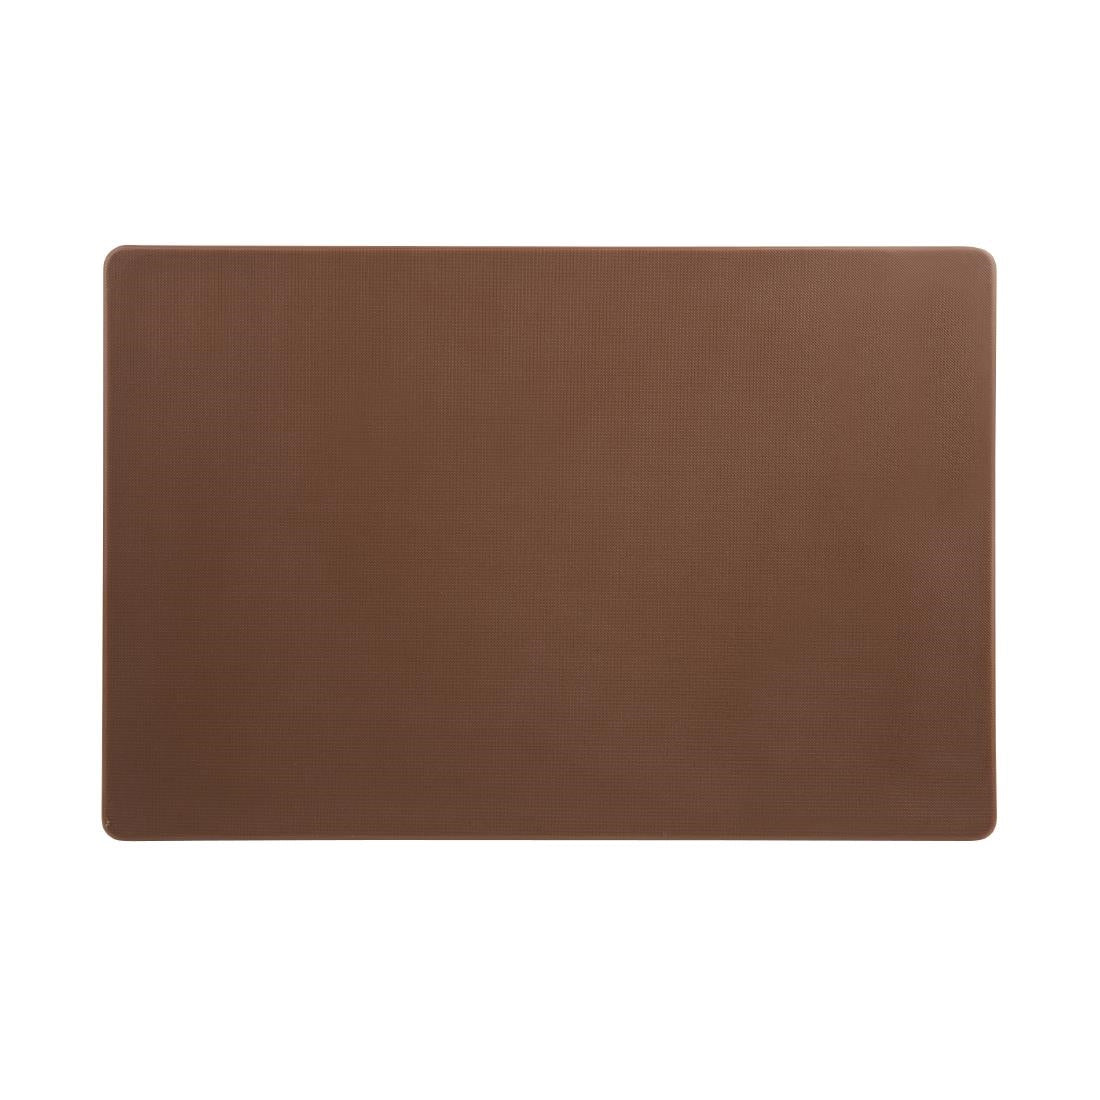 DM003 Hygiplas Extra Thick Low Density Brown Chopping Board Standard JD Catering Equipment Solutions Ltd